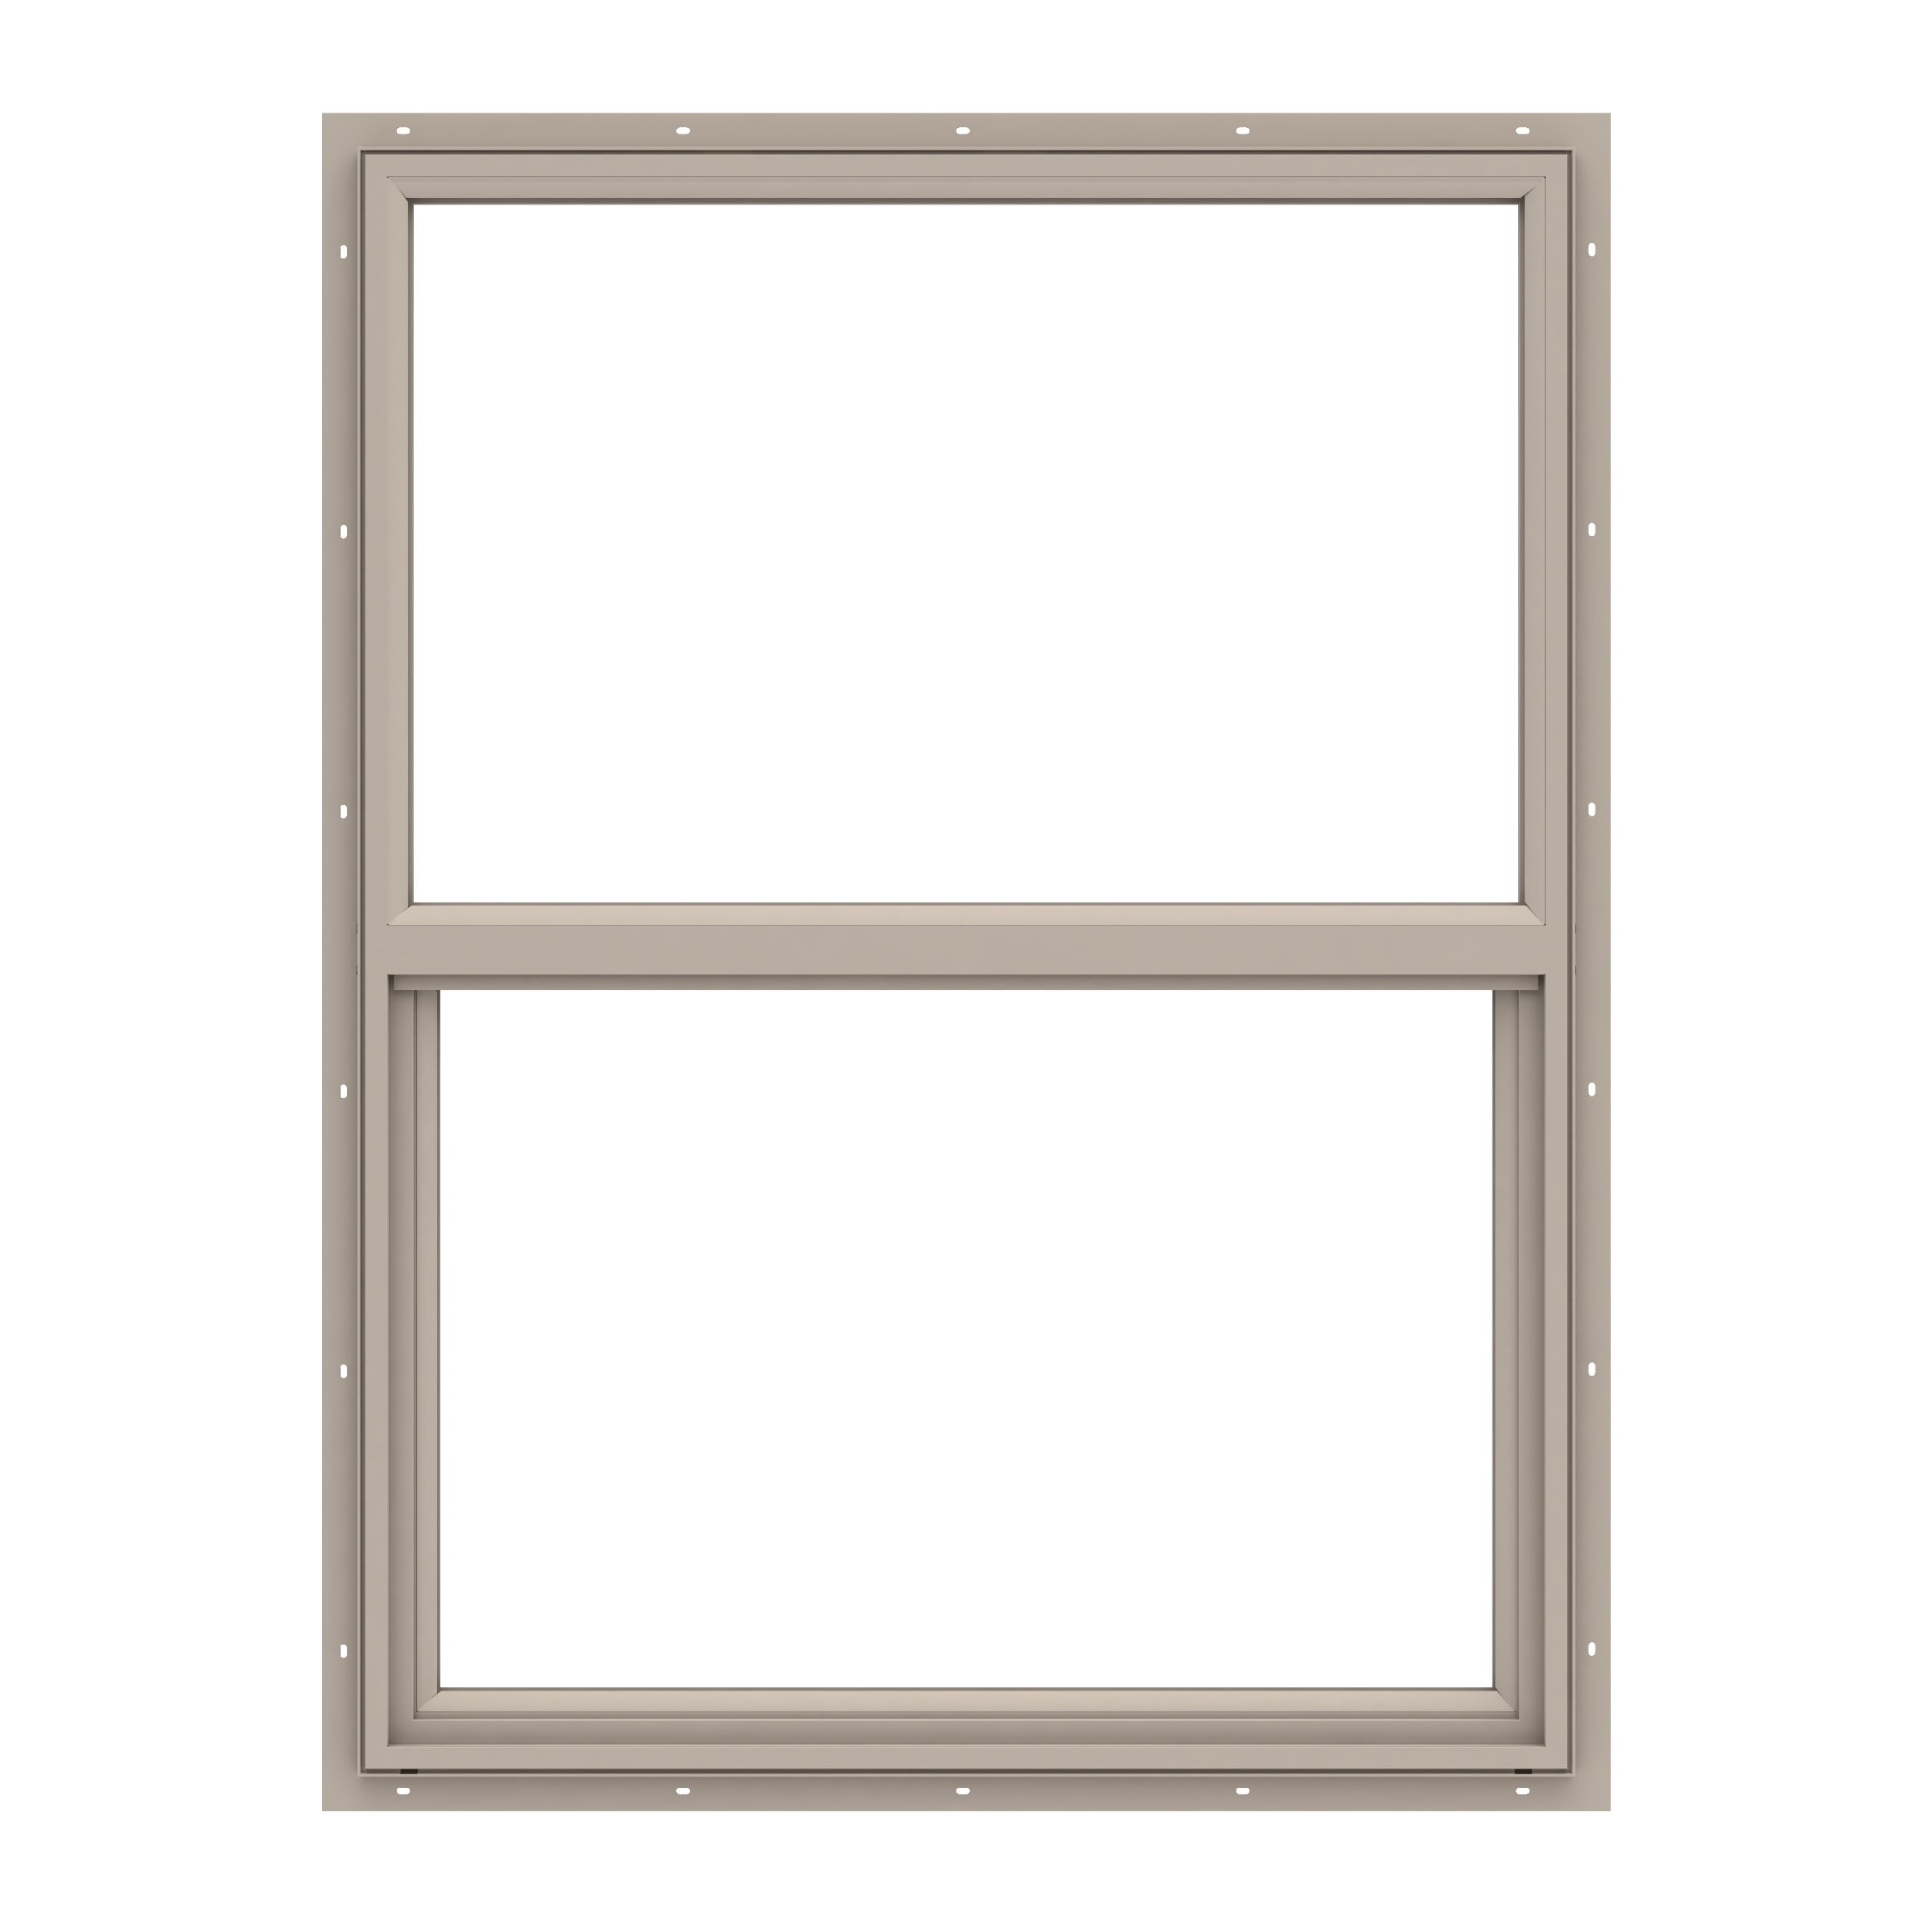 Pella 150 Series New Construction 23.5-in x 35.5-in x 2.6875-in Jamb Fossil Vinyl Low-e Argon Single Hung Window Half Screen Included in Brown -  1000011107